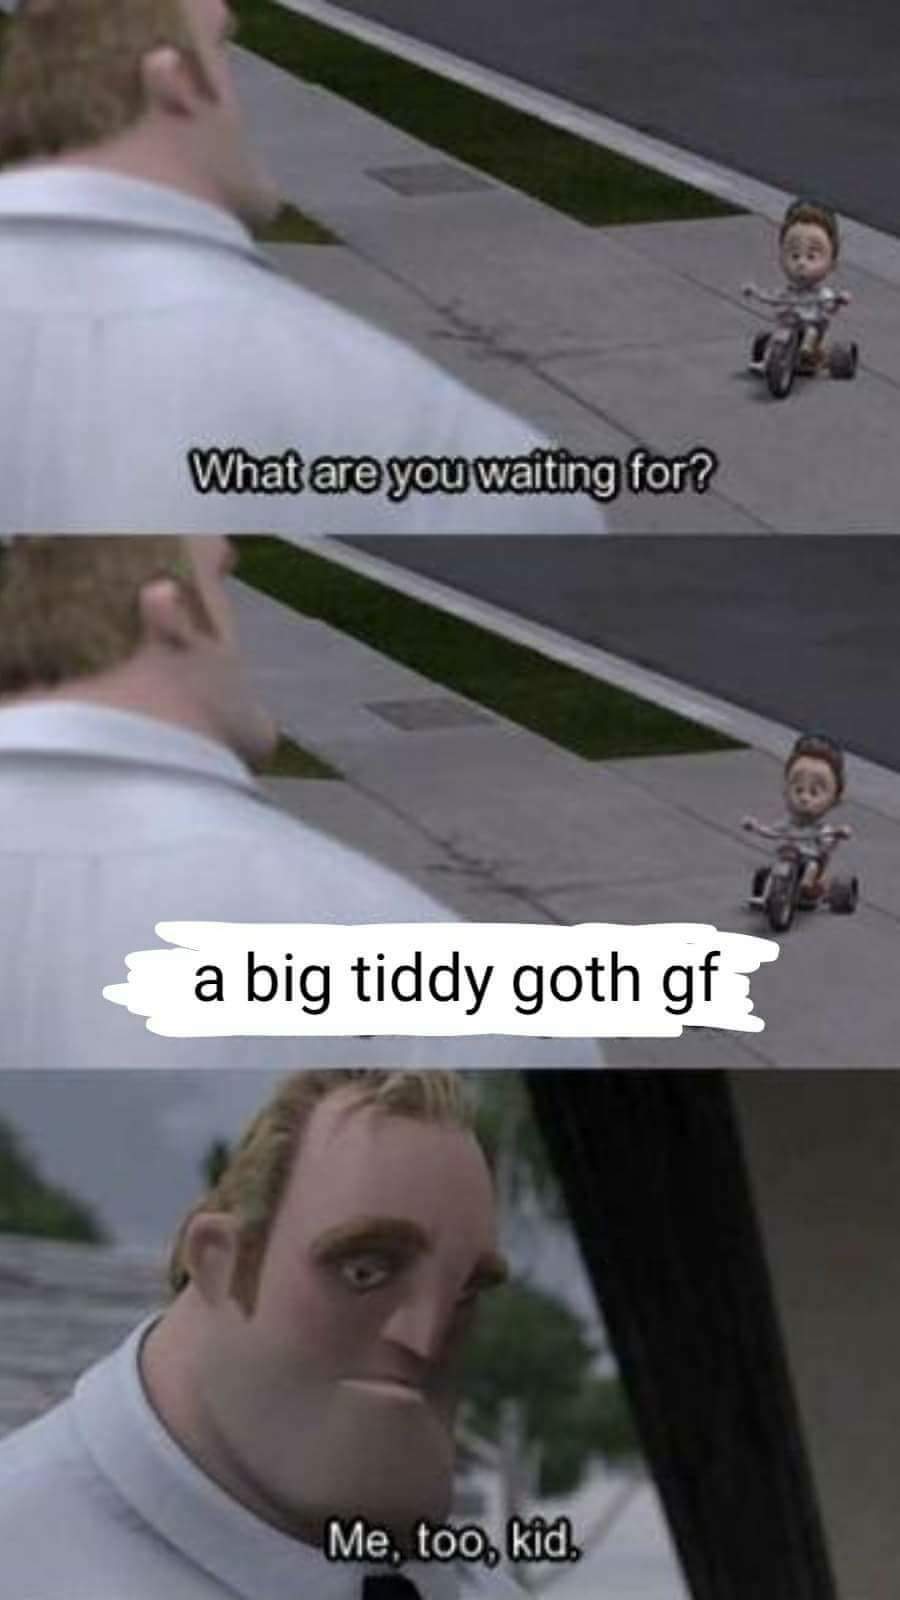 Big tiddy thicc gothicc grill - meme